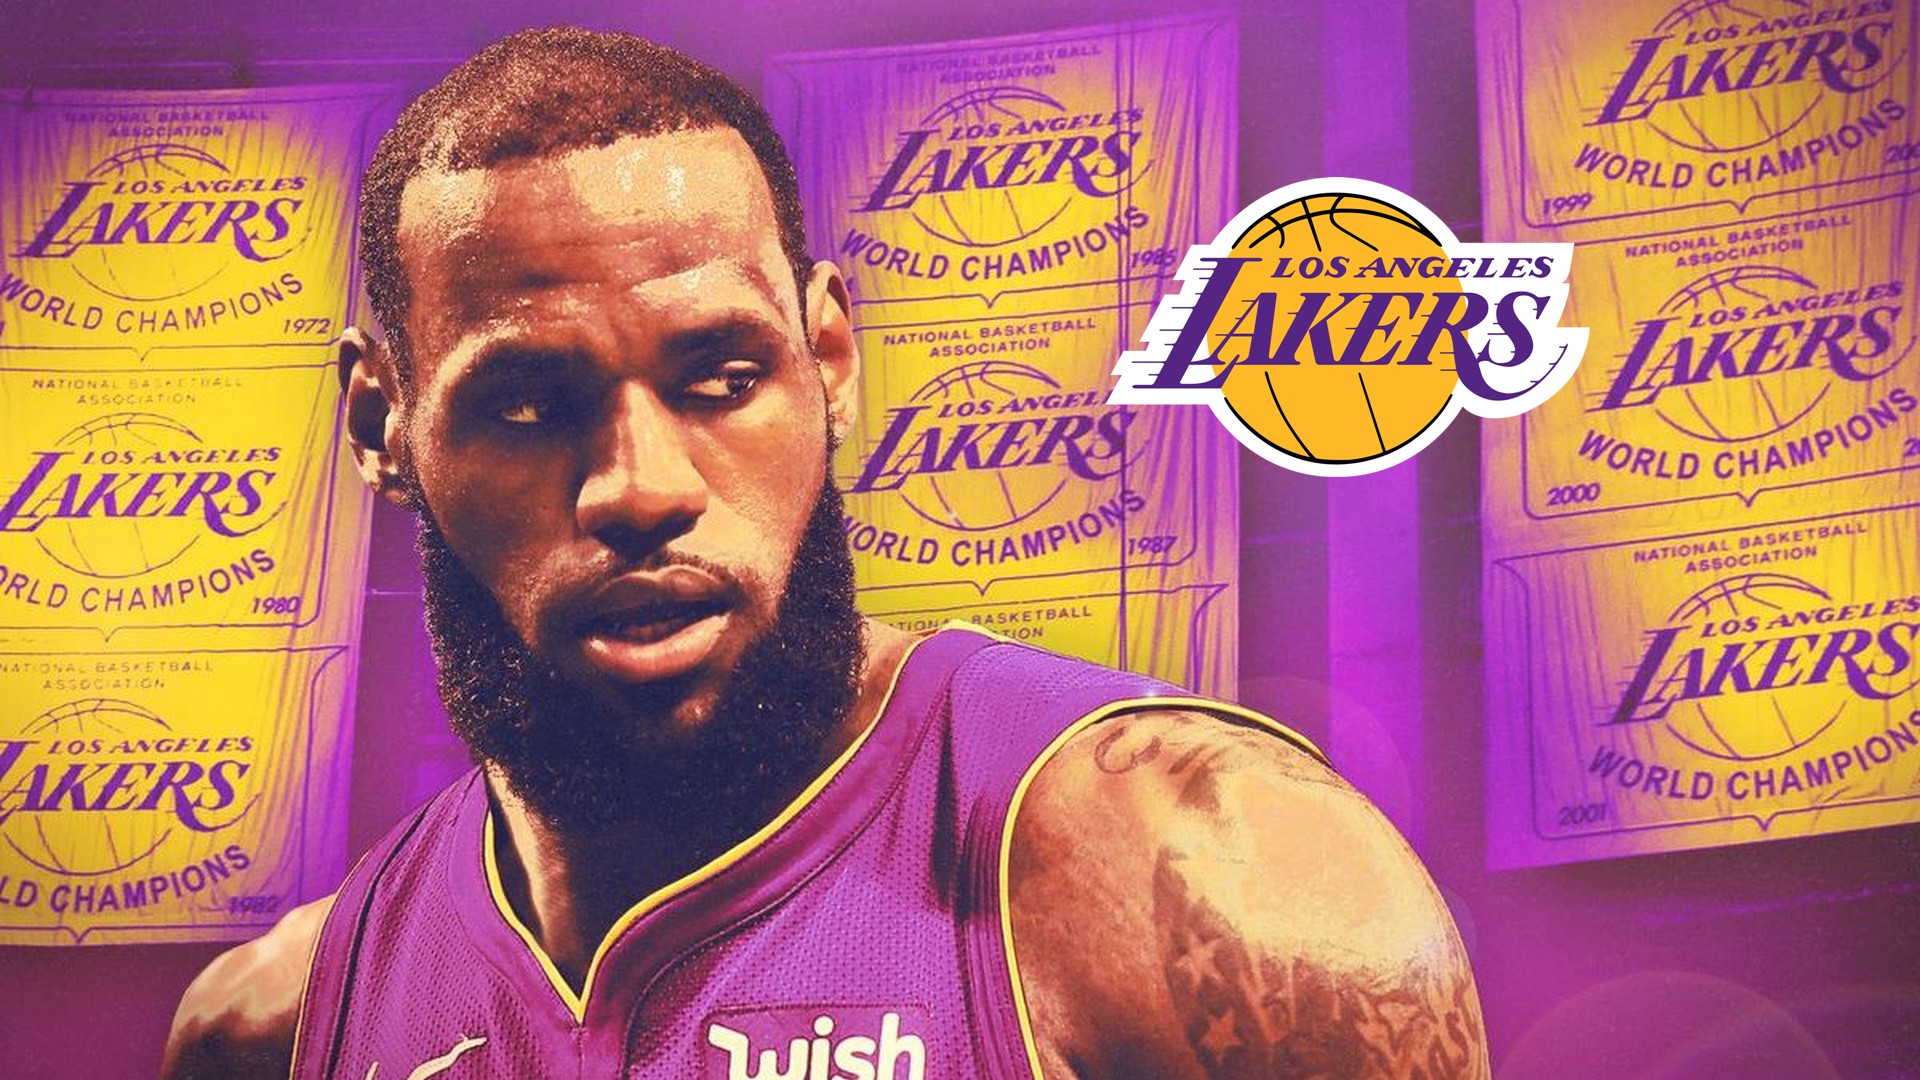 LeBron James Lakers HD Wallpapers with image dimensions 1920x1080 pixel. You can make this wallpaper for your Desktop Computer Backgrounds, Windows or Mac Screensavers, iPhone Lock screen, Tablet or Android and another Mobile Phone device